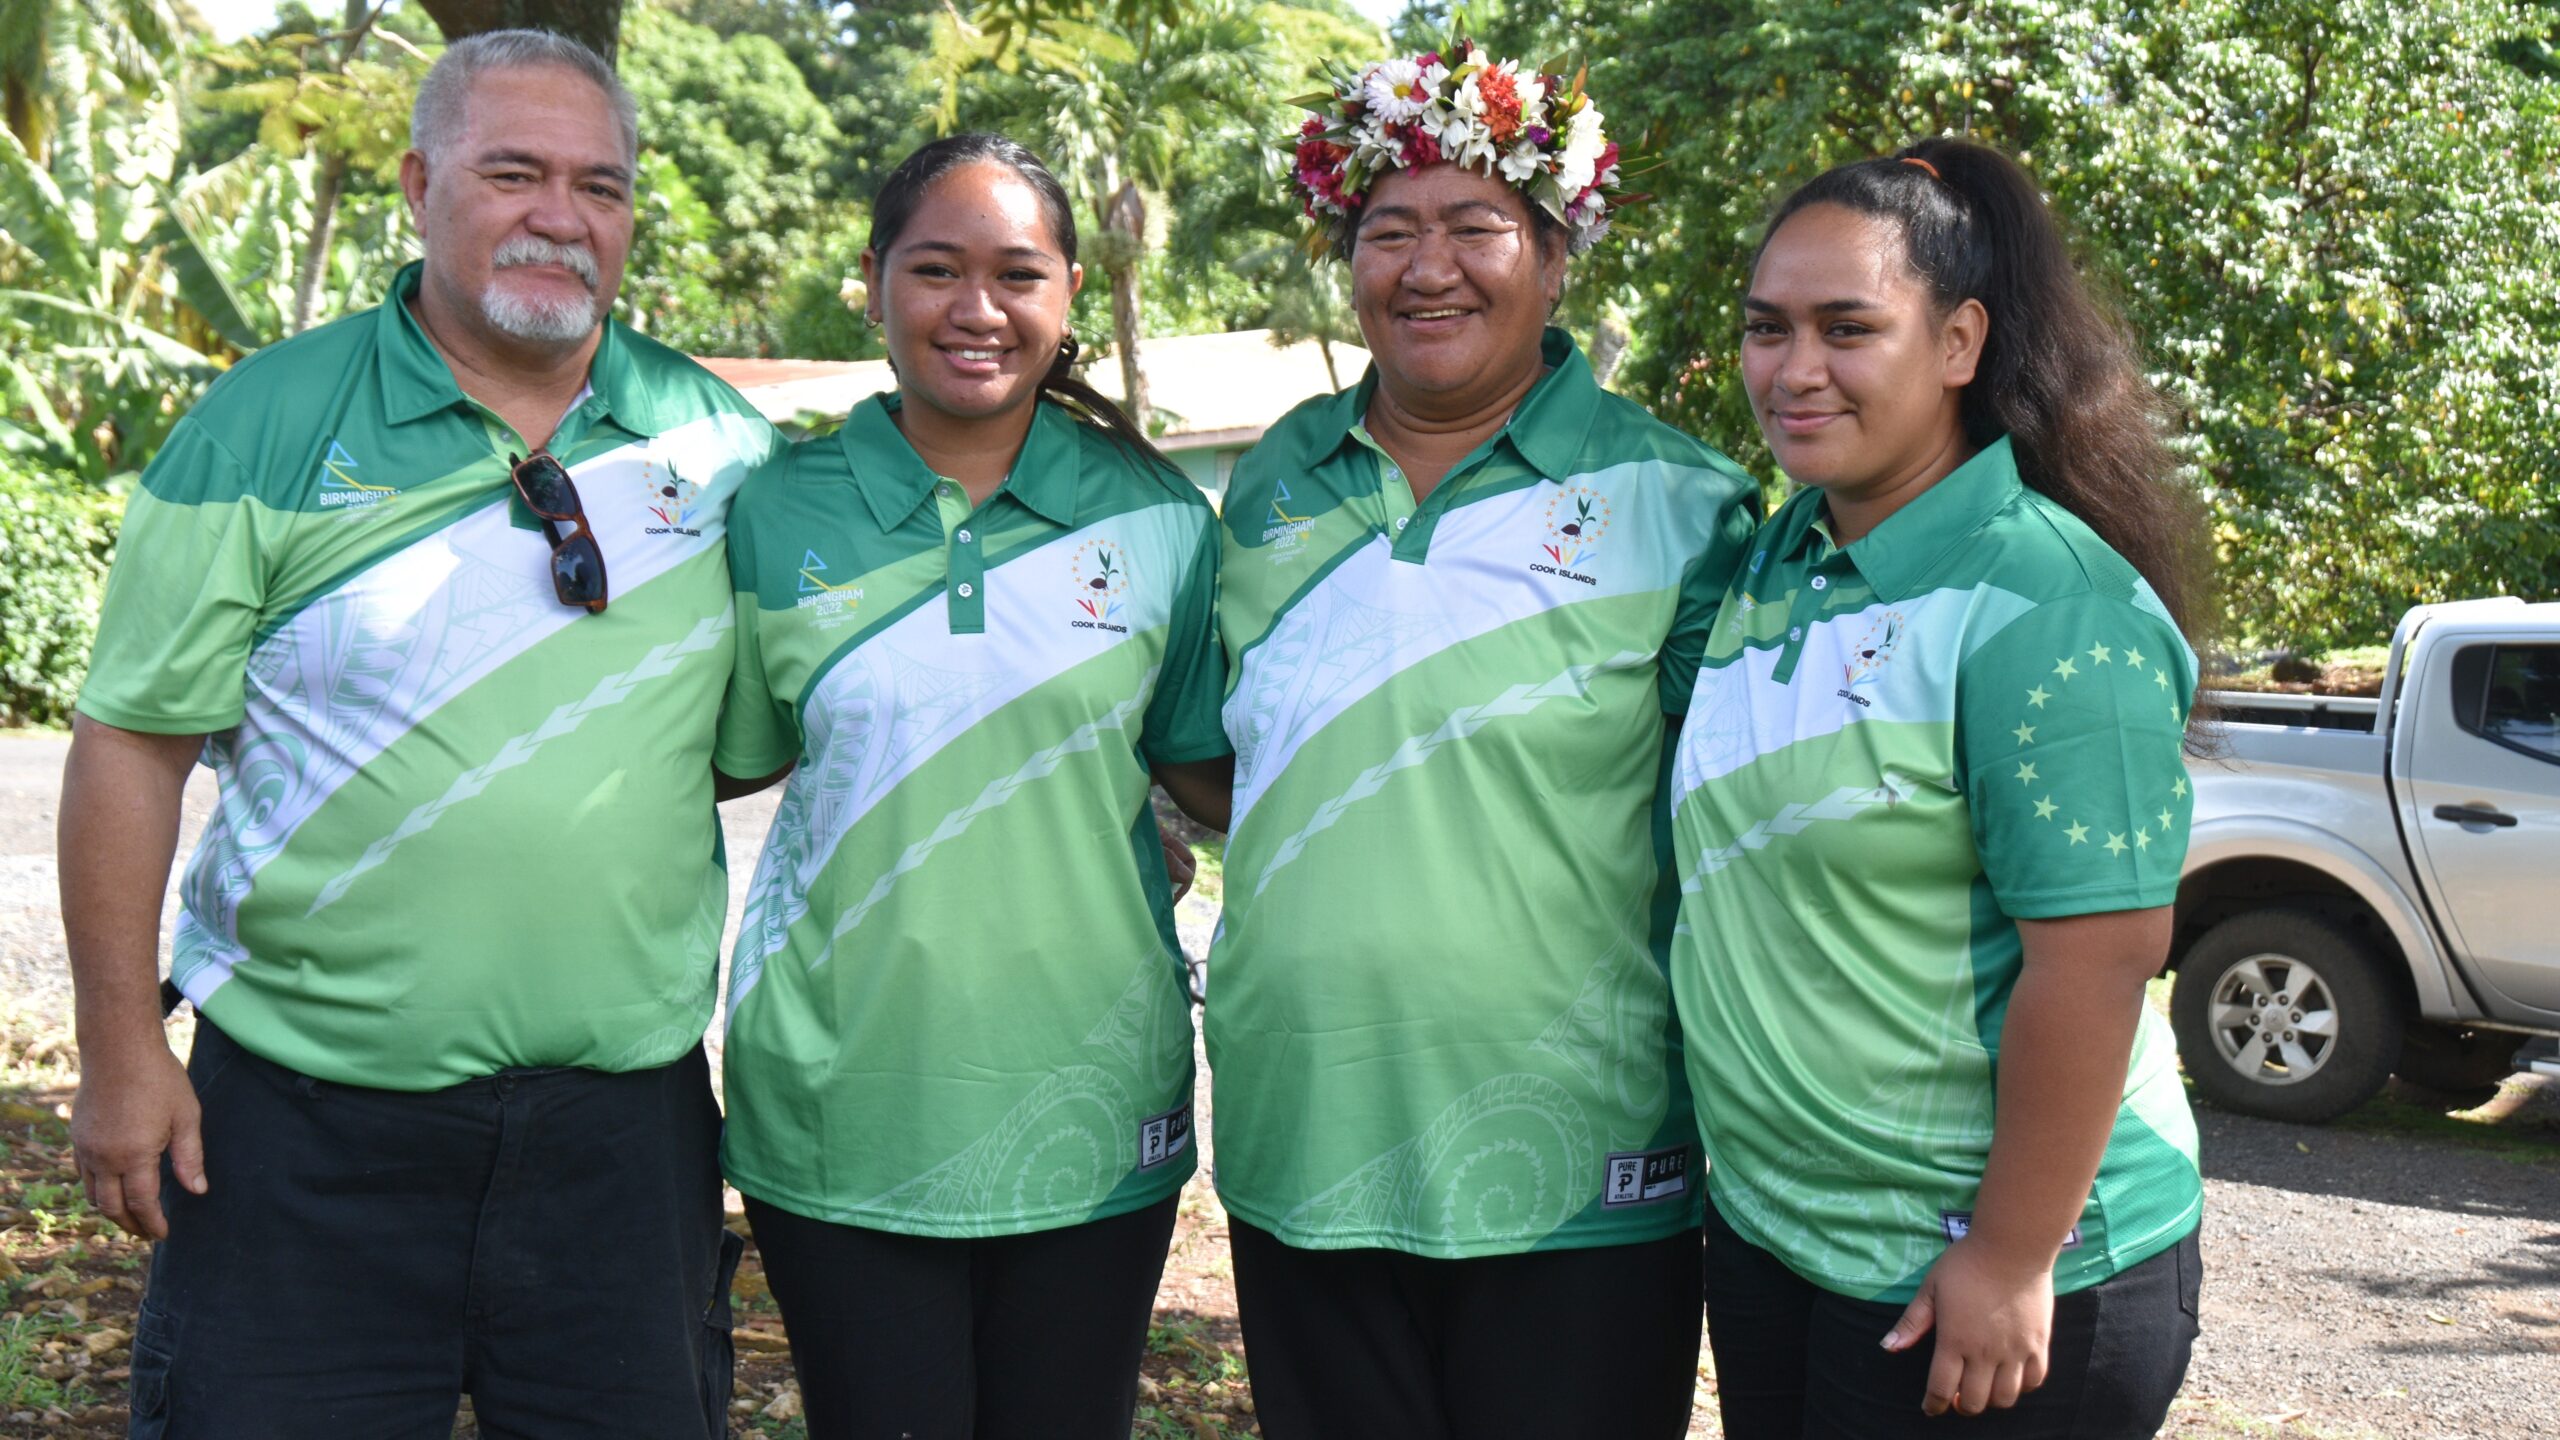 Bowlers off to Commonwealth Games